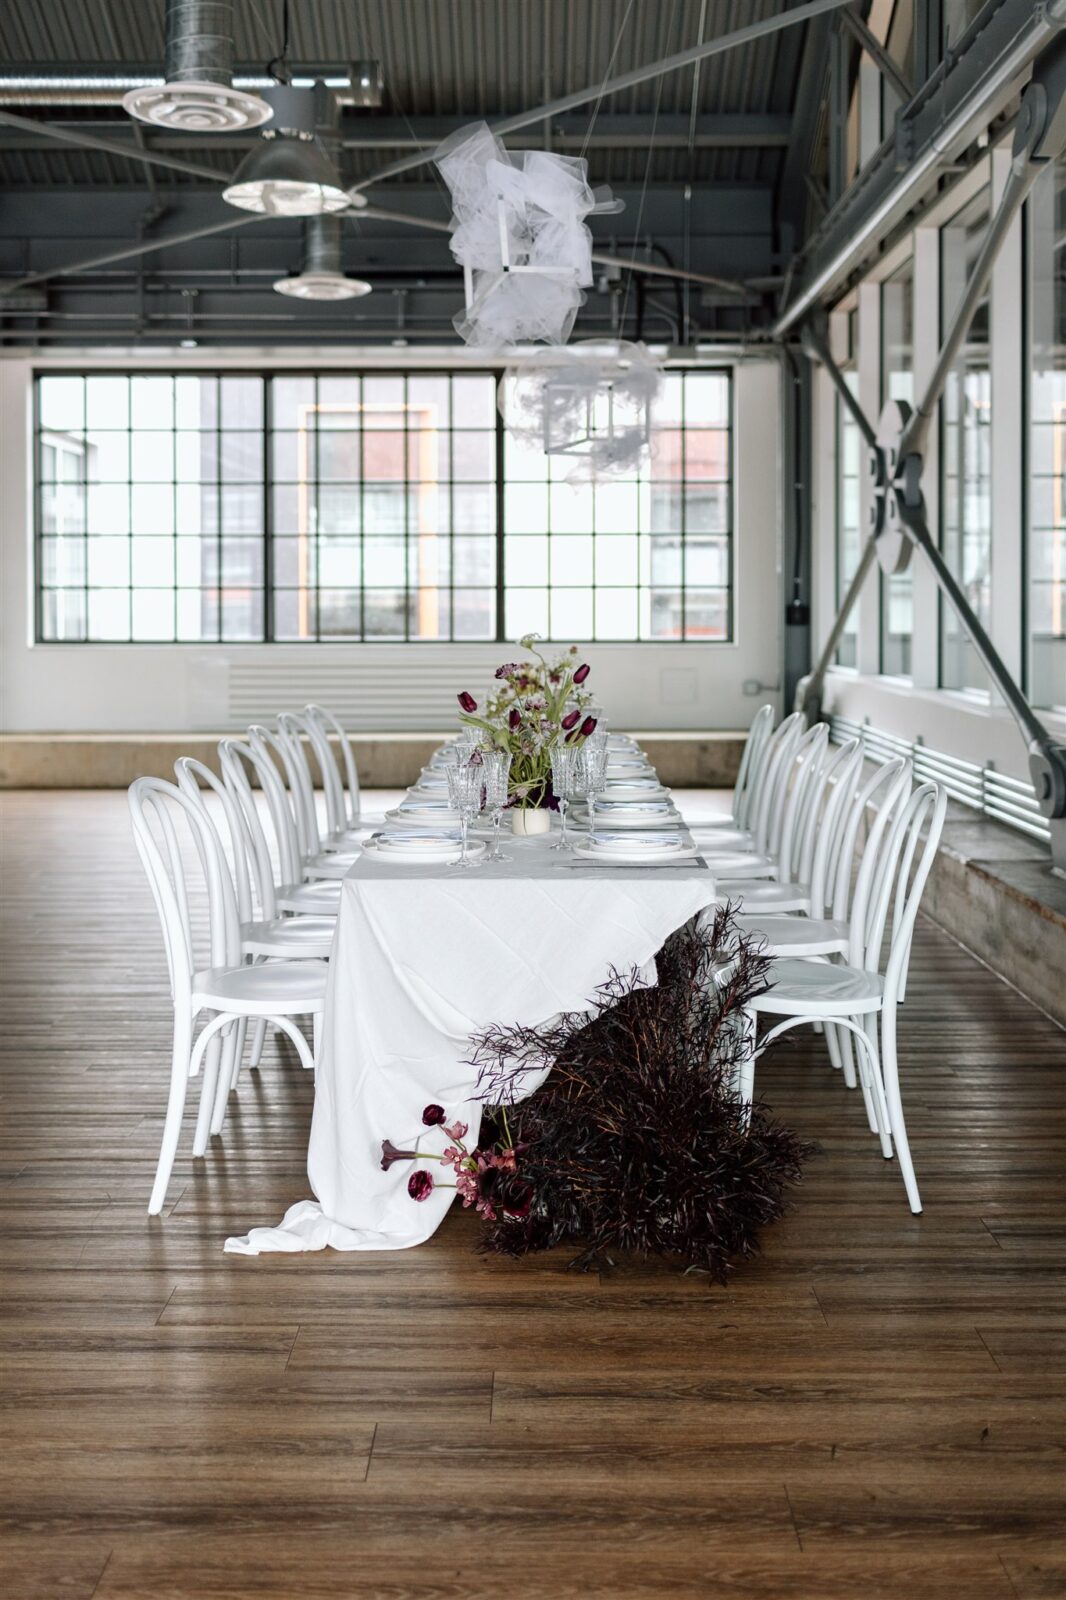 Industrial chic wedding reception at The Wallace Venue in Vancouver, BC. Sleek lines, textural accents, and high-end aesthetic. Contemporary wedding inspiration.